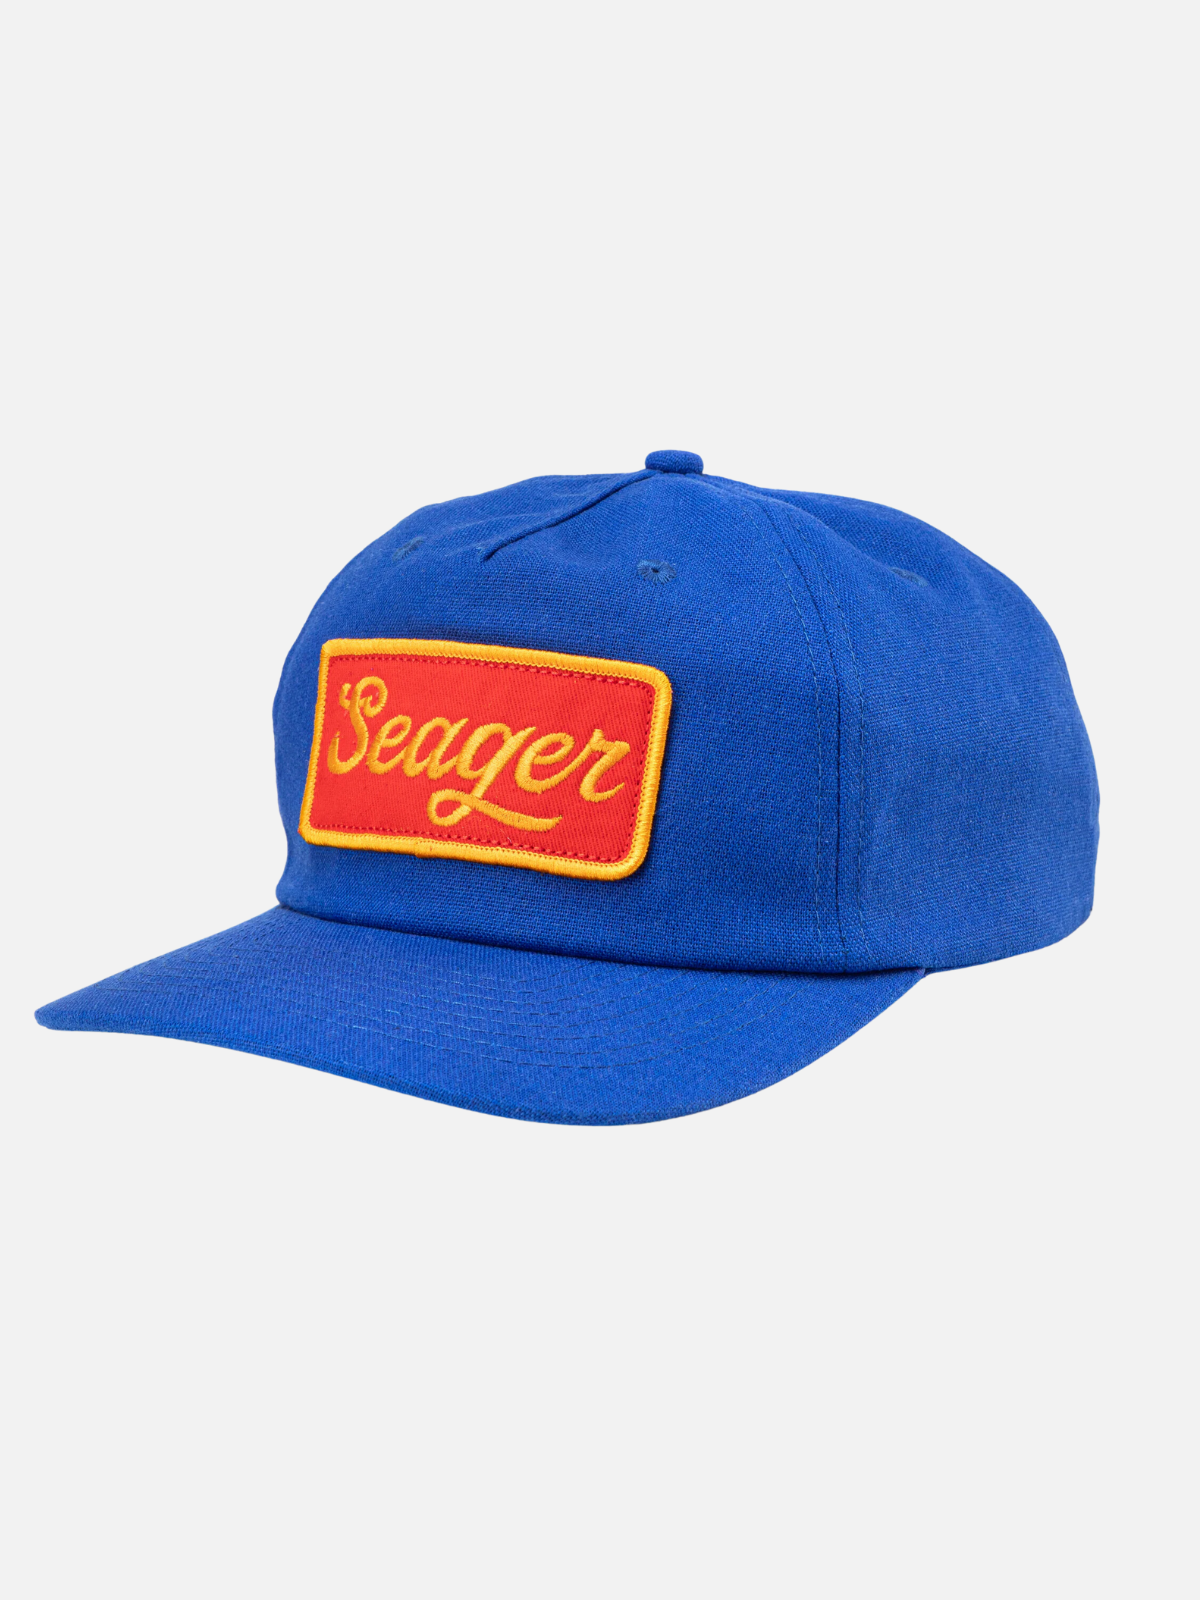 seager uncle bill hemp snapback cotton blend electric blue red gold yellow embroidered patch kempt athens ga georgia men's clothing store